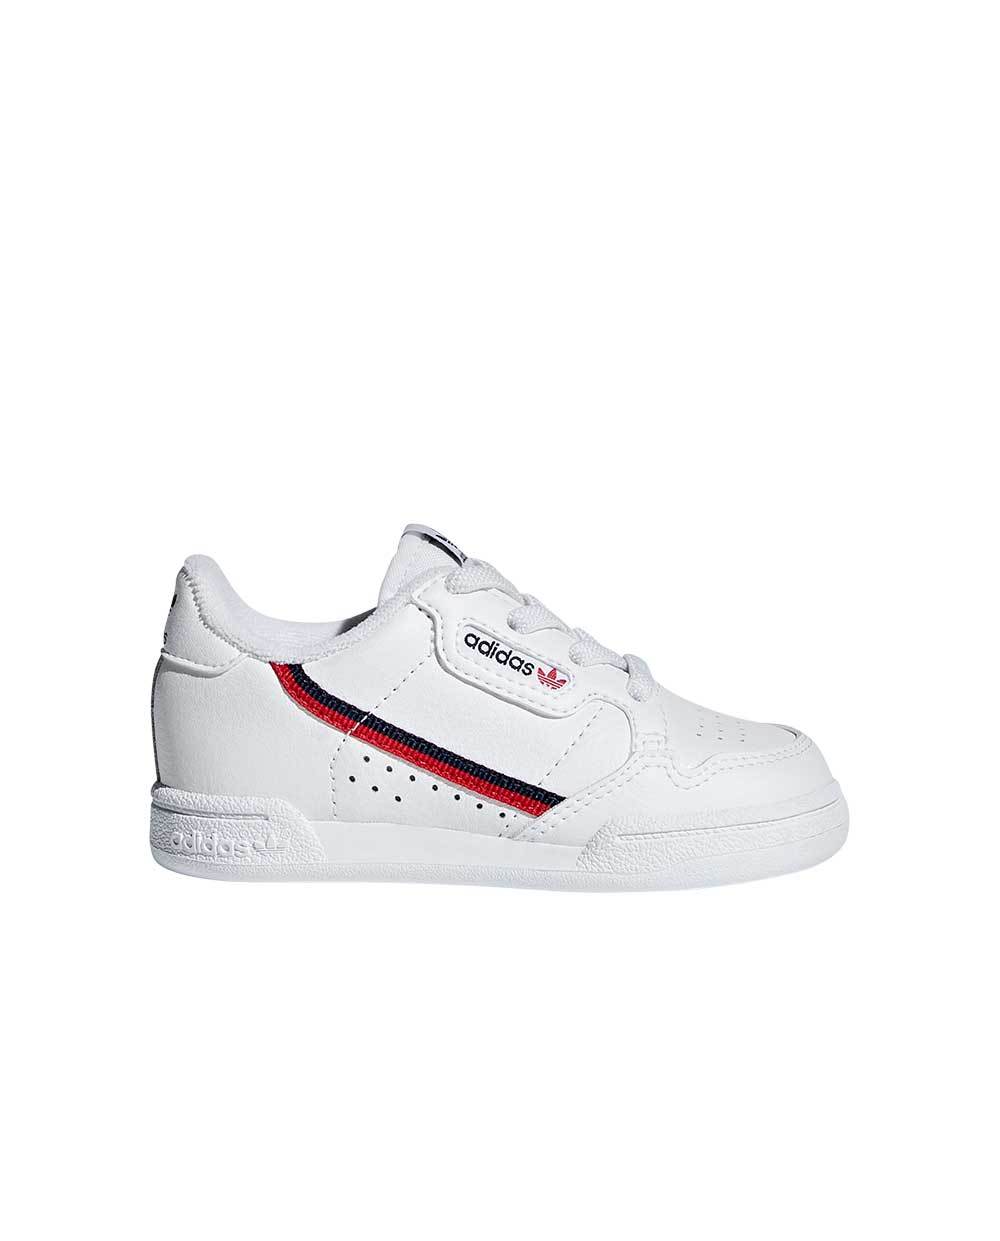 Adidas Continental White and Red